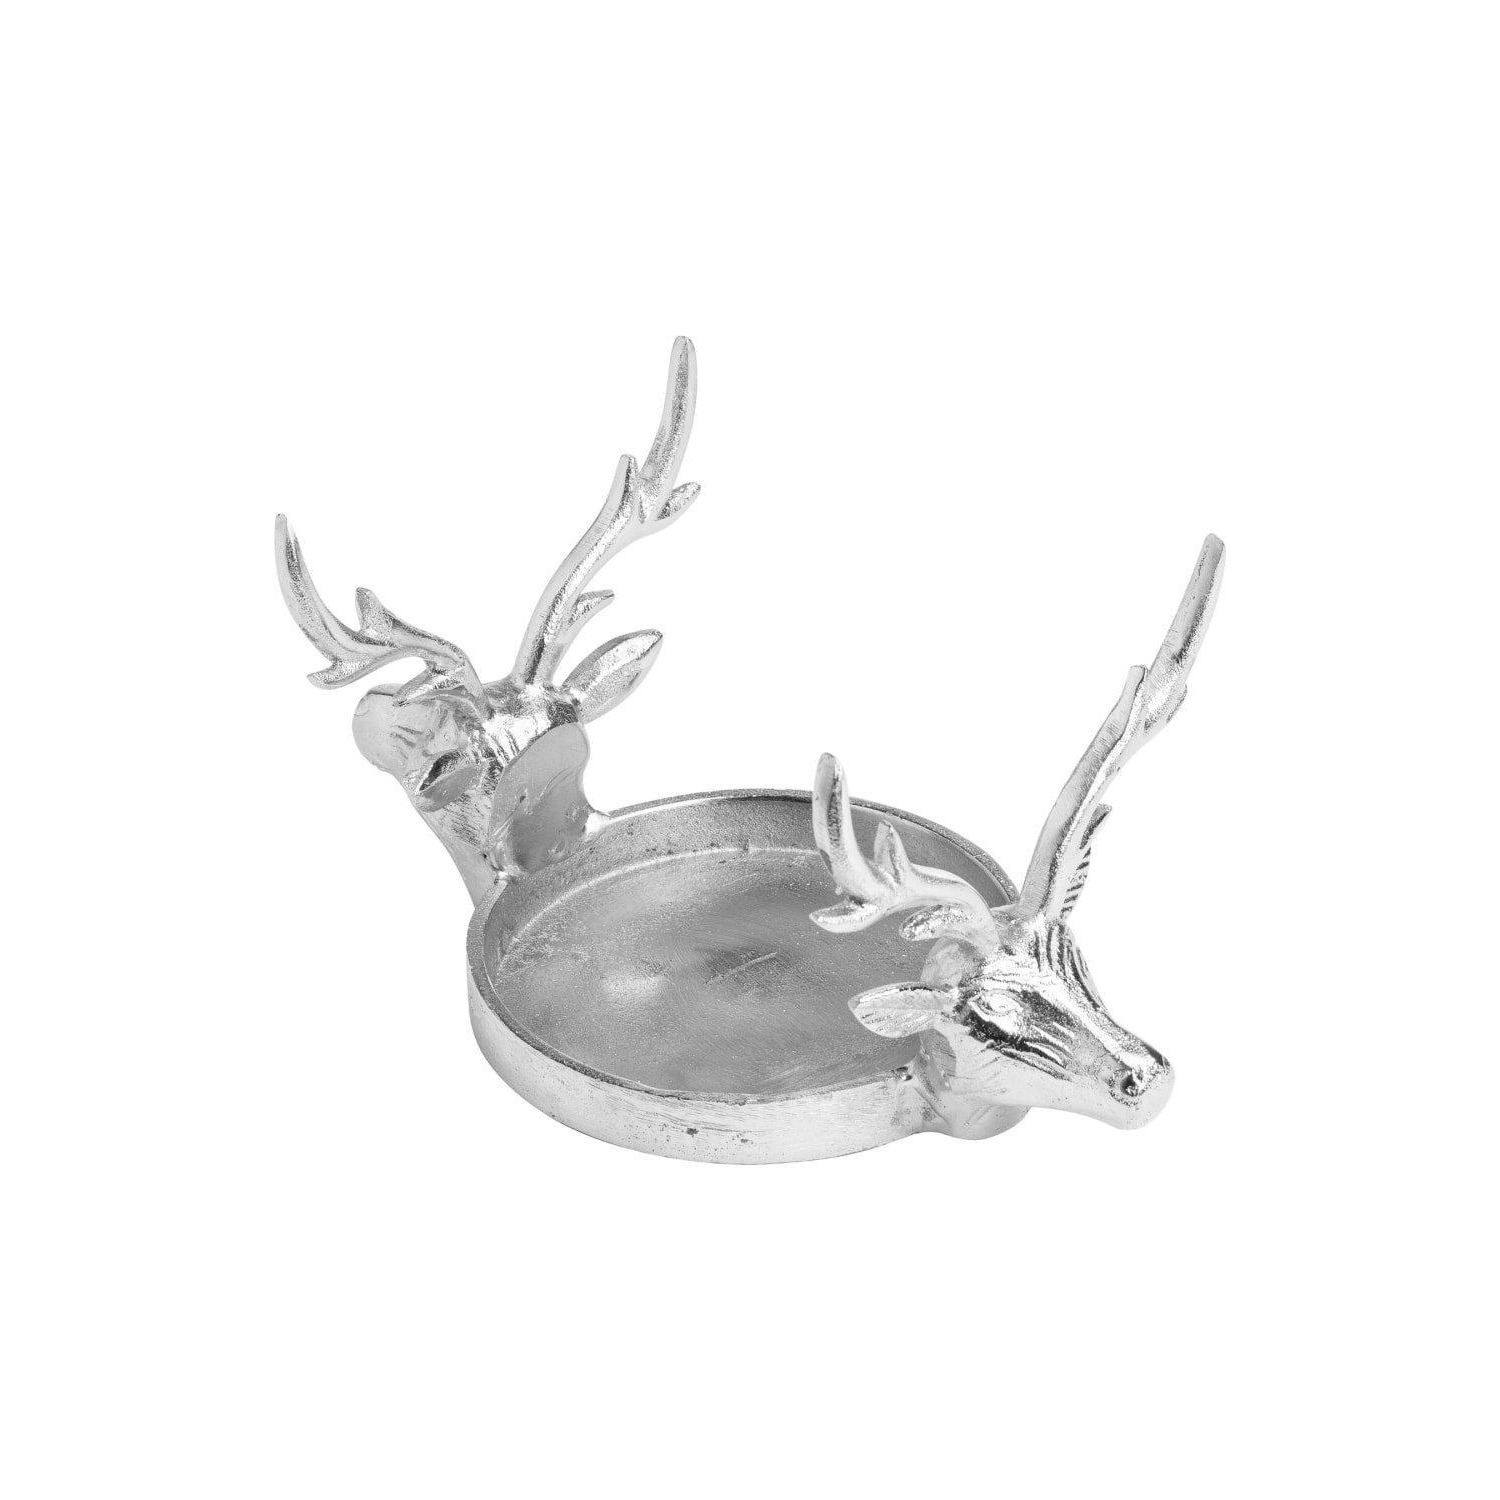 Farrah Collection Aluminium Stag Candle Holder - image 1